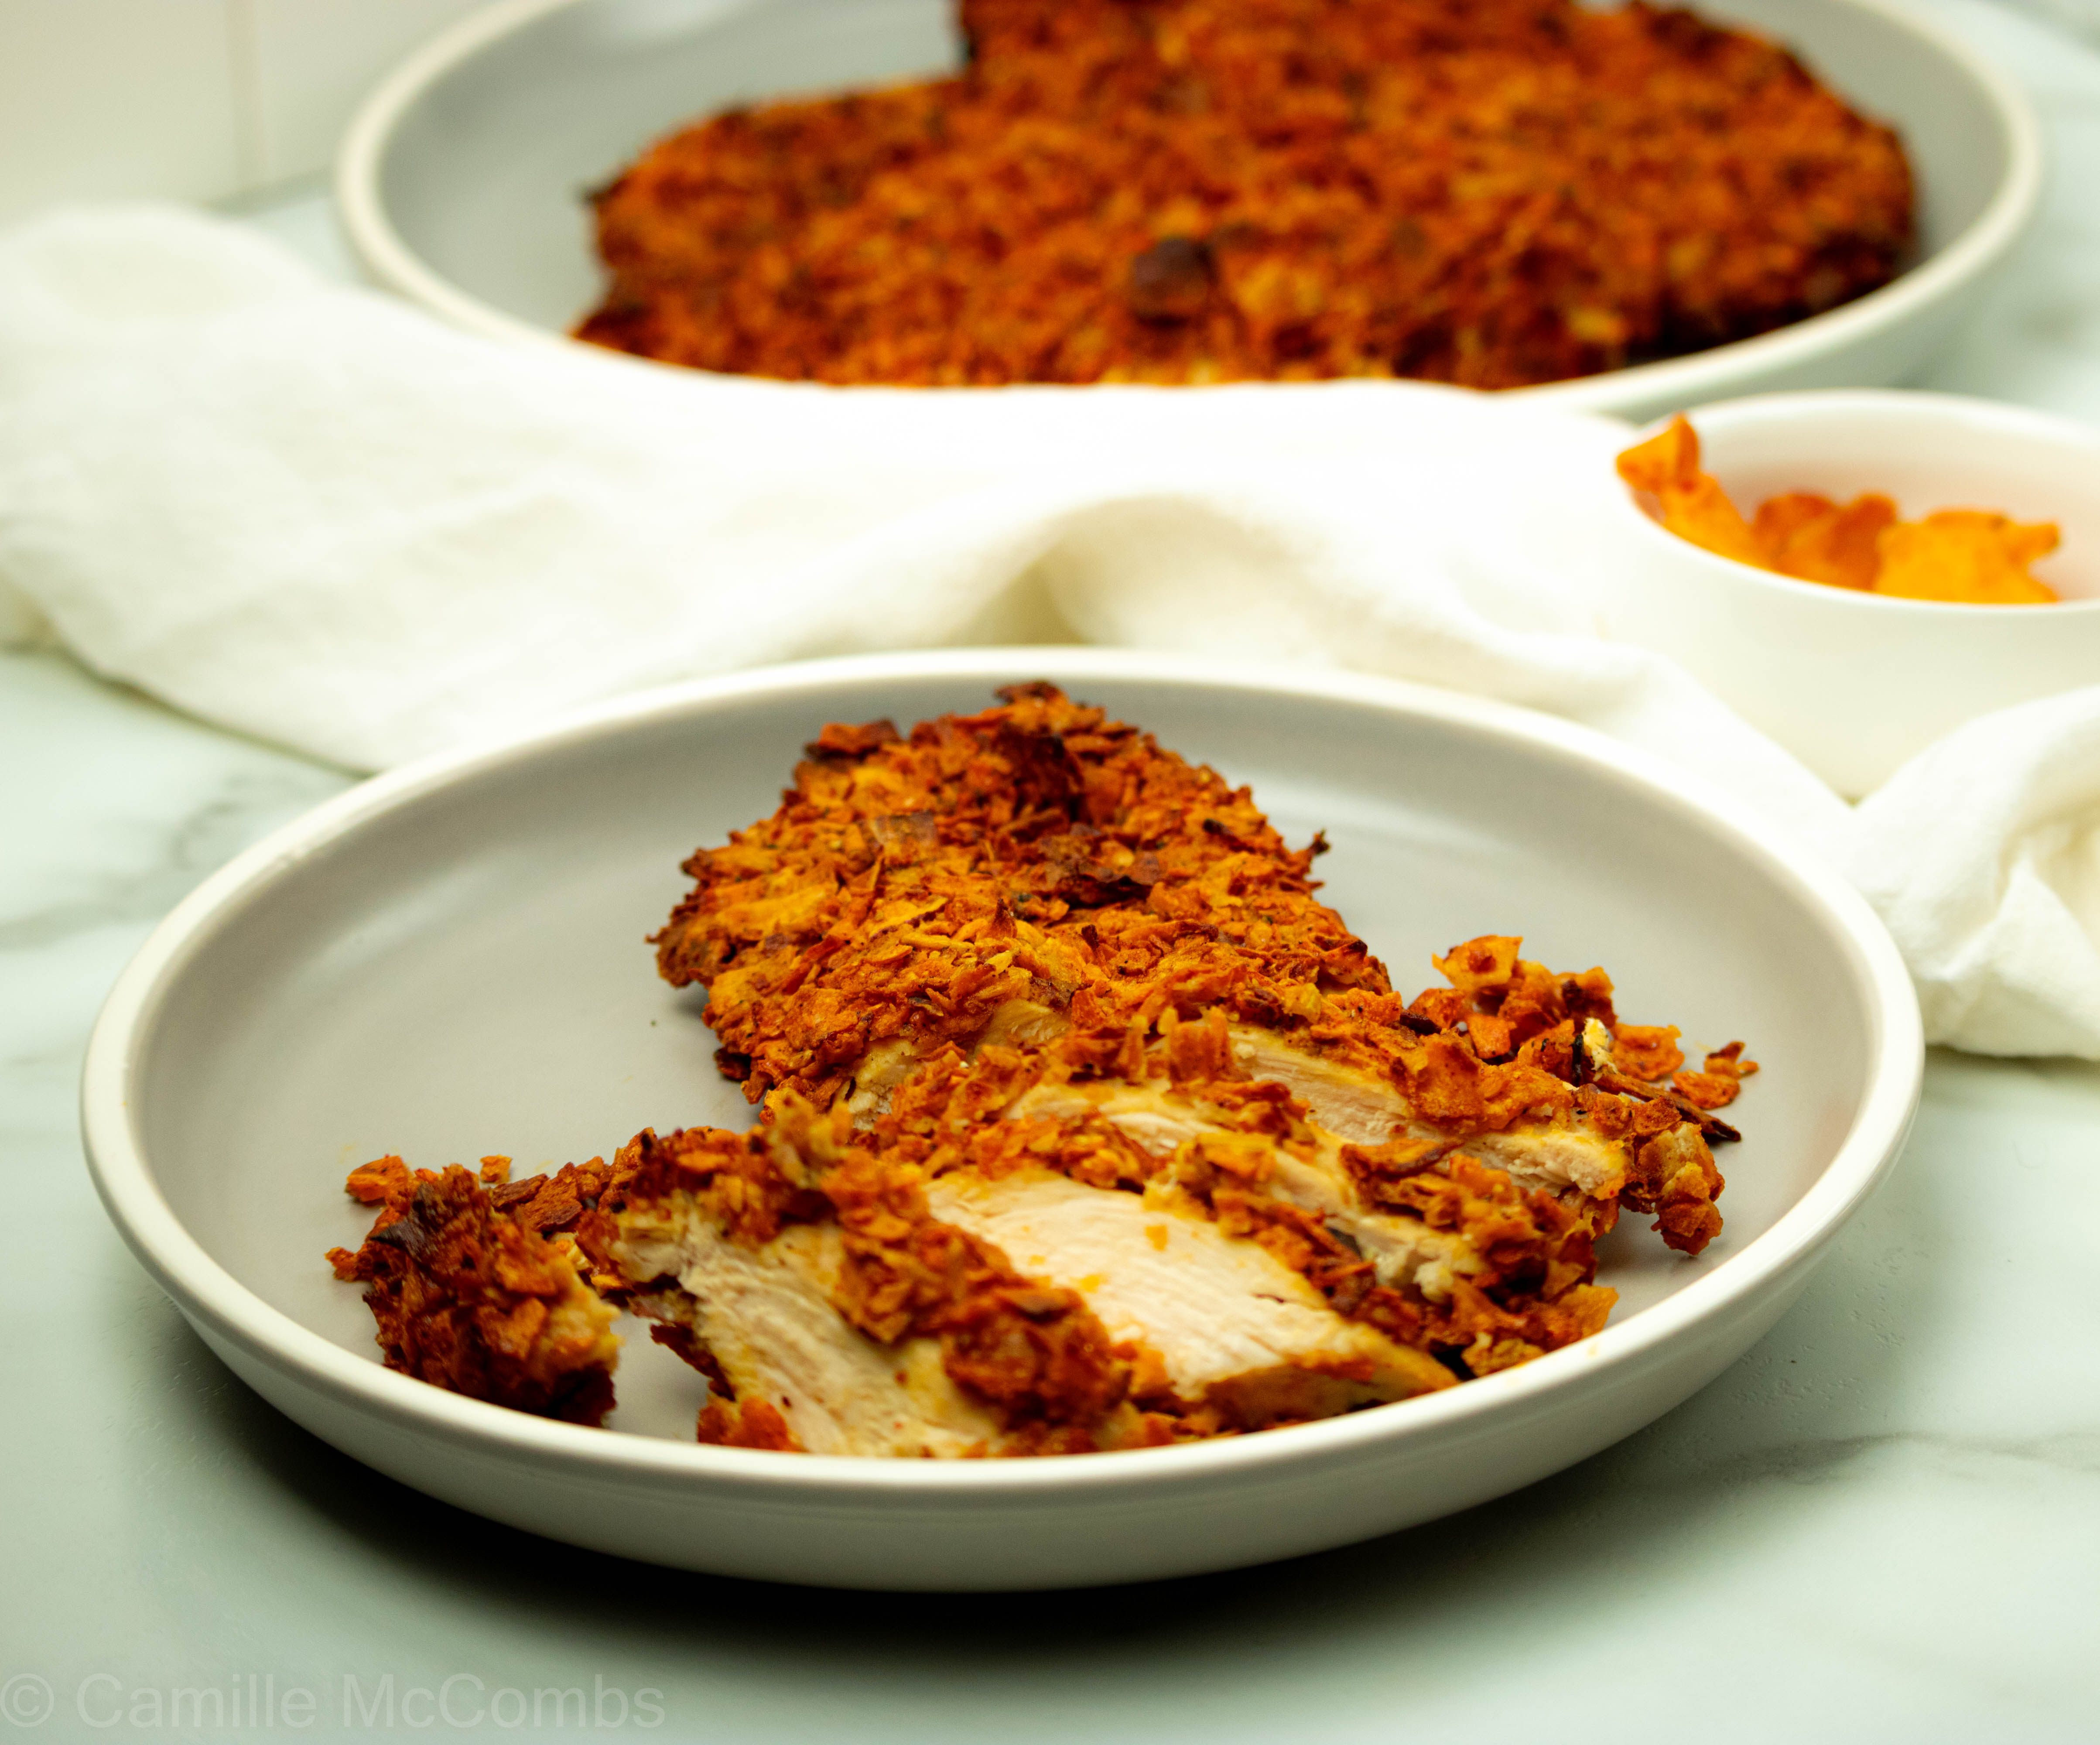 Baked Chicken Breast with Sweet Potato Chip Coating